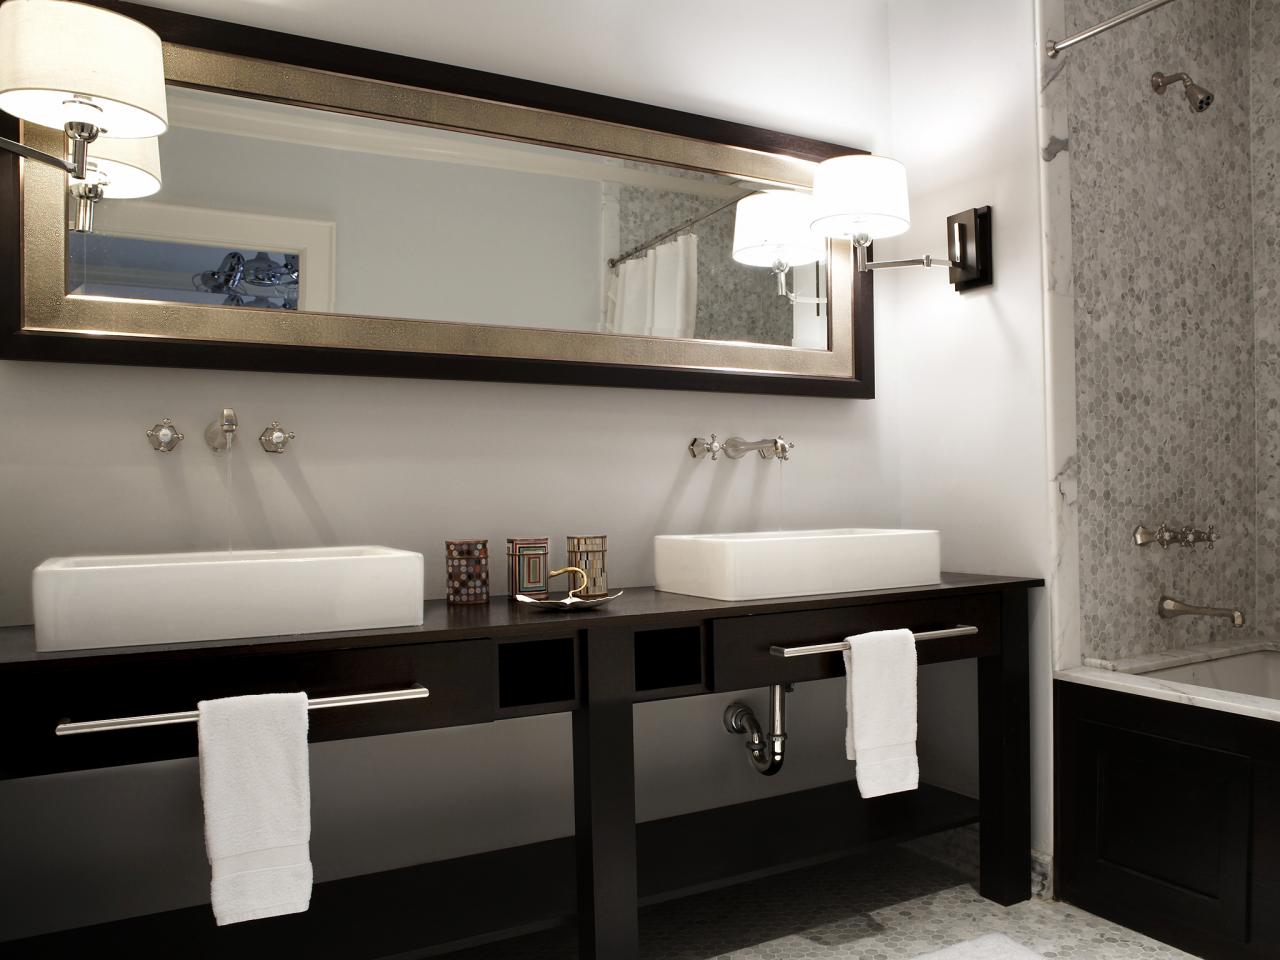 Design With Vanity Bathroom Design With Long Bathroom Vanity Mirror Built In Washbasins Cabinets White Painted Walls And Marble Floor Bathroom Stunning Bathroom Vanity Mirrors For Elegant Homes